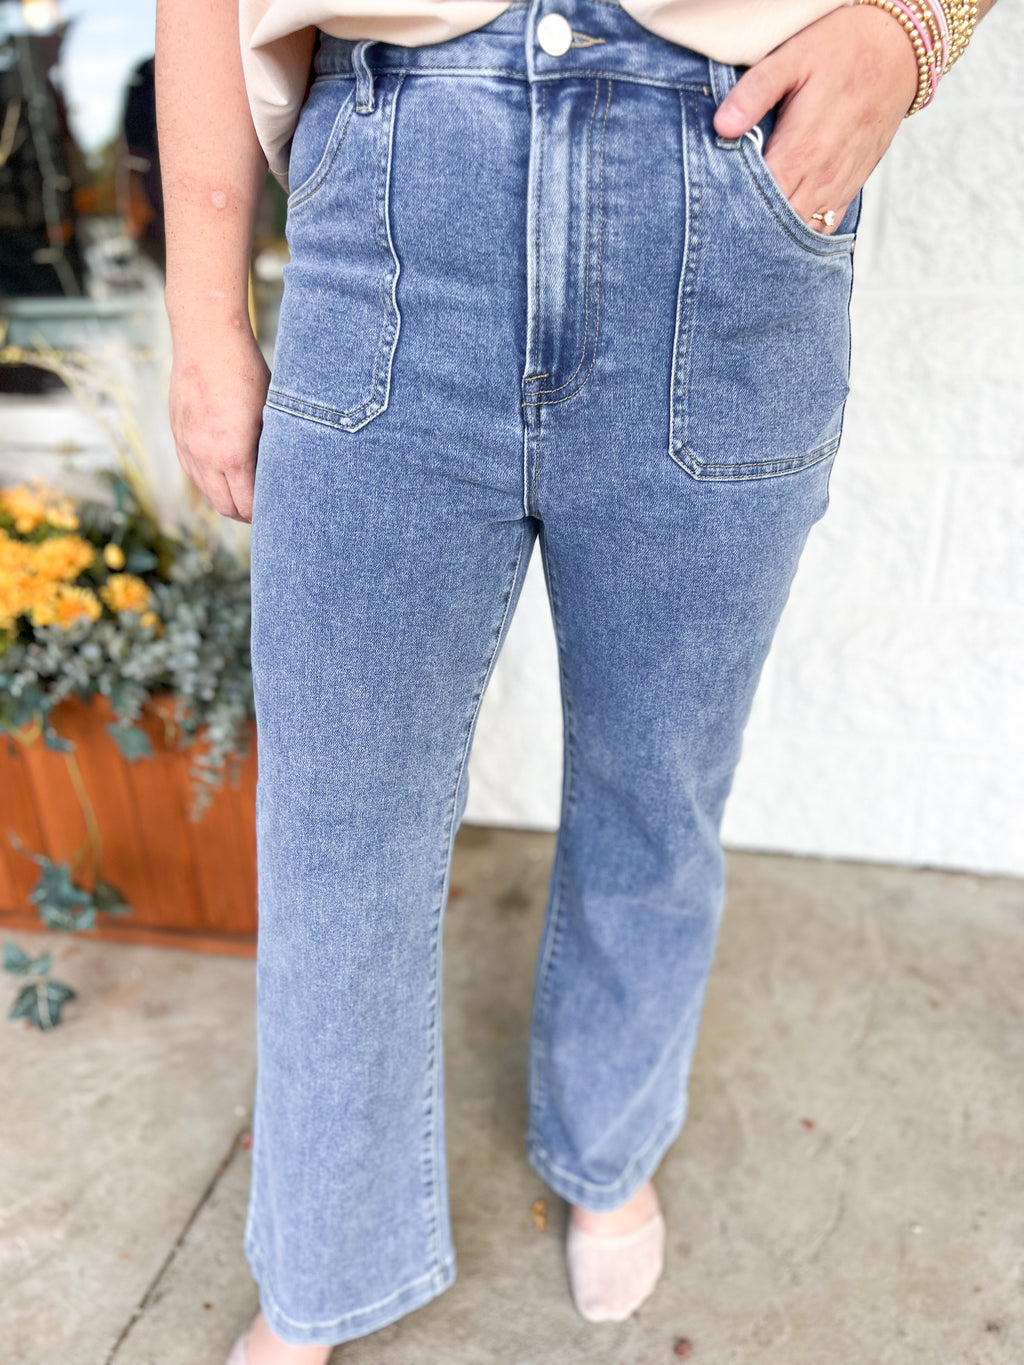 Trouser Style High Rise Risen Jean-The Lovely Closet-The Lovely Closet, Women's Fashion Boutique in Alexandria, KY